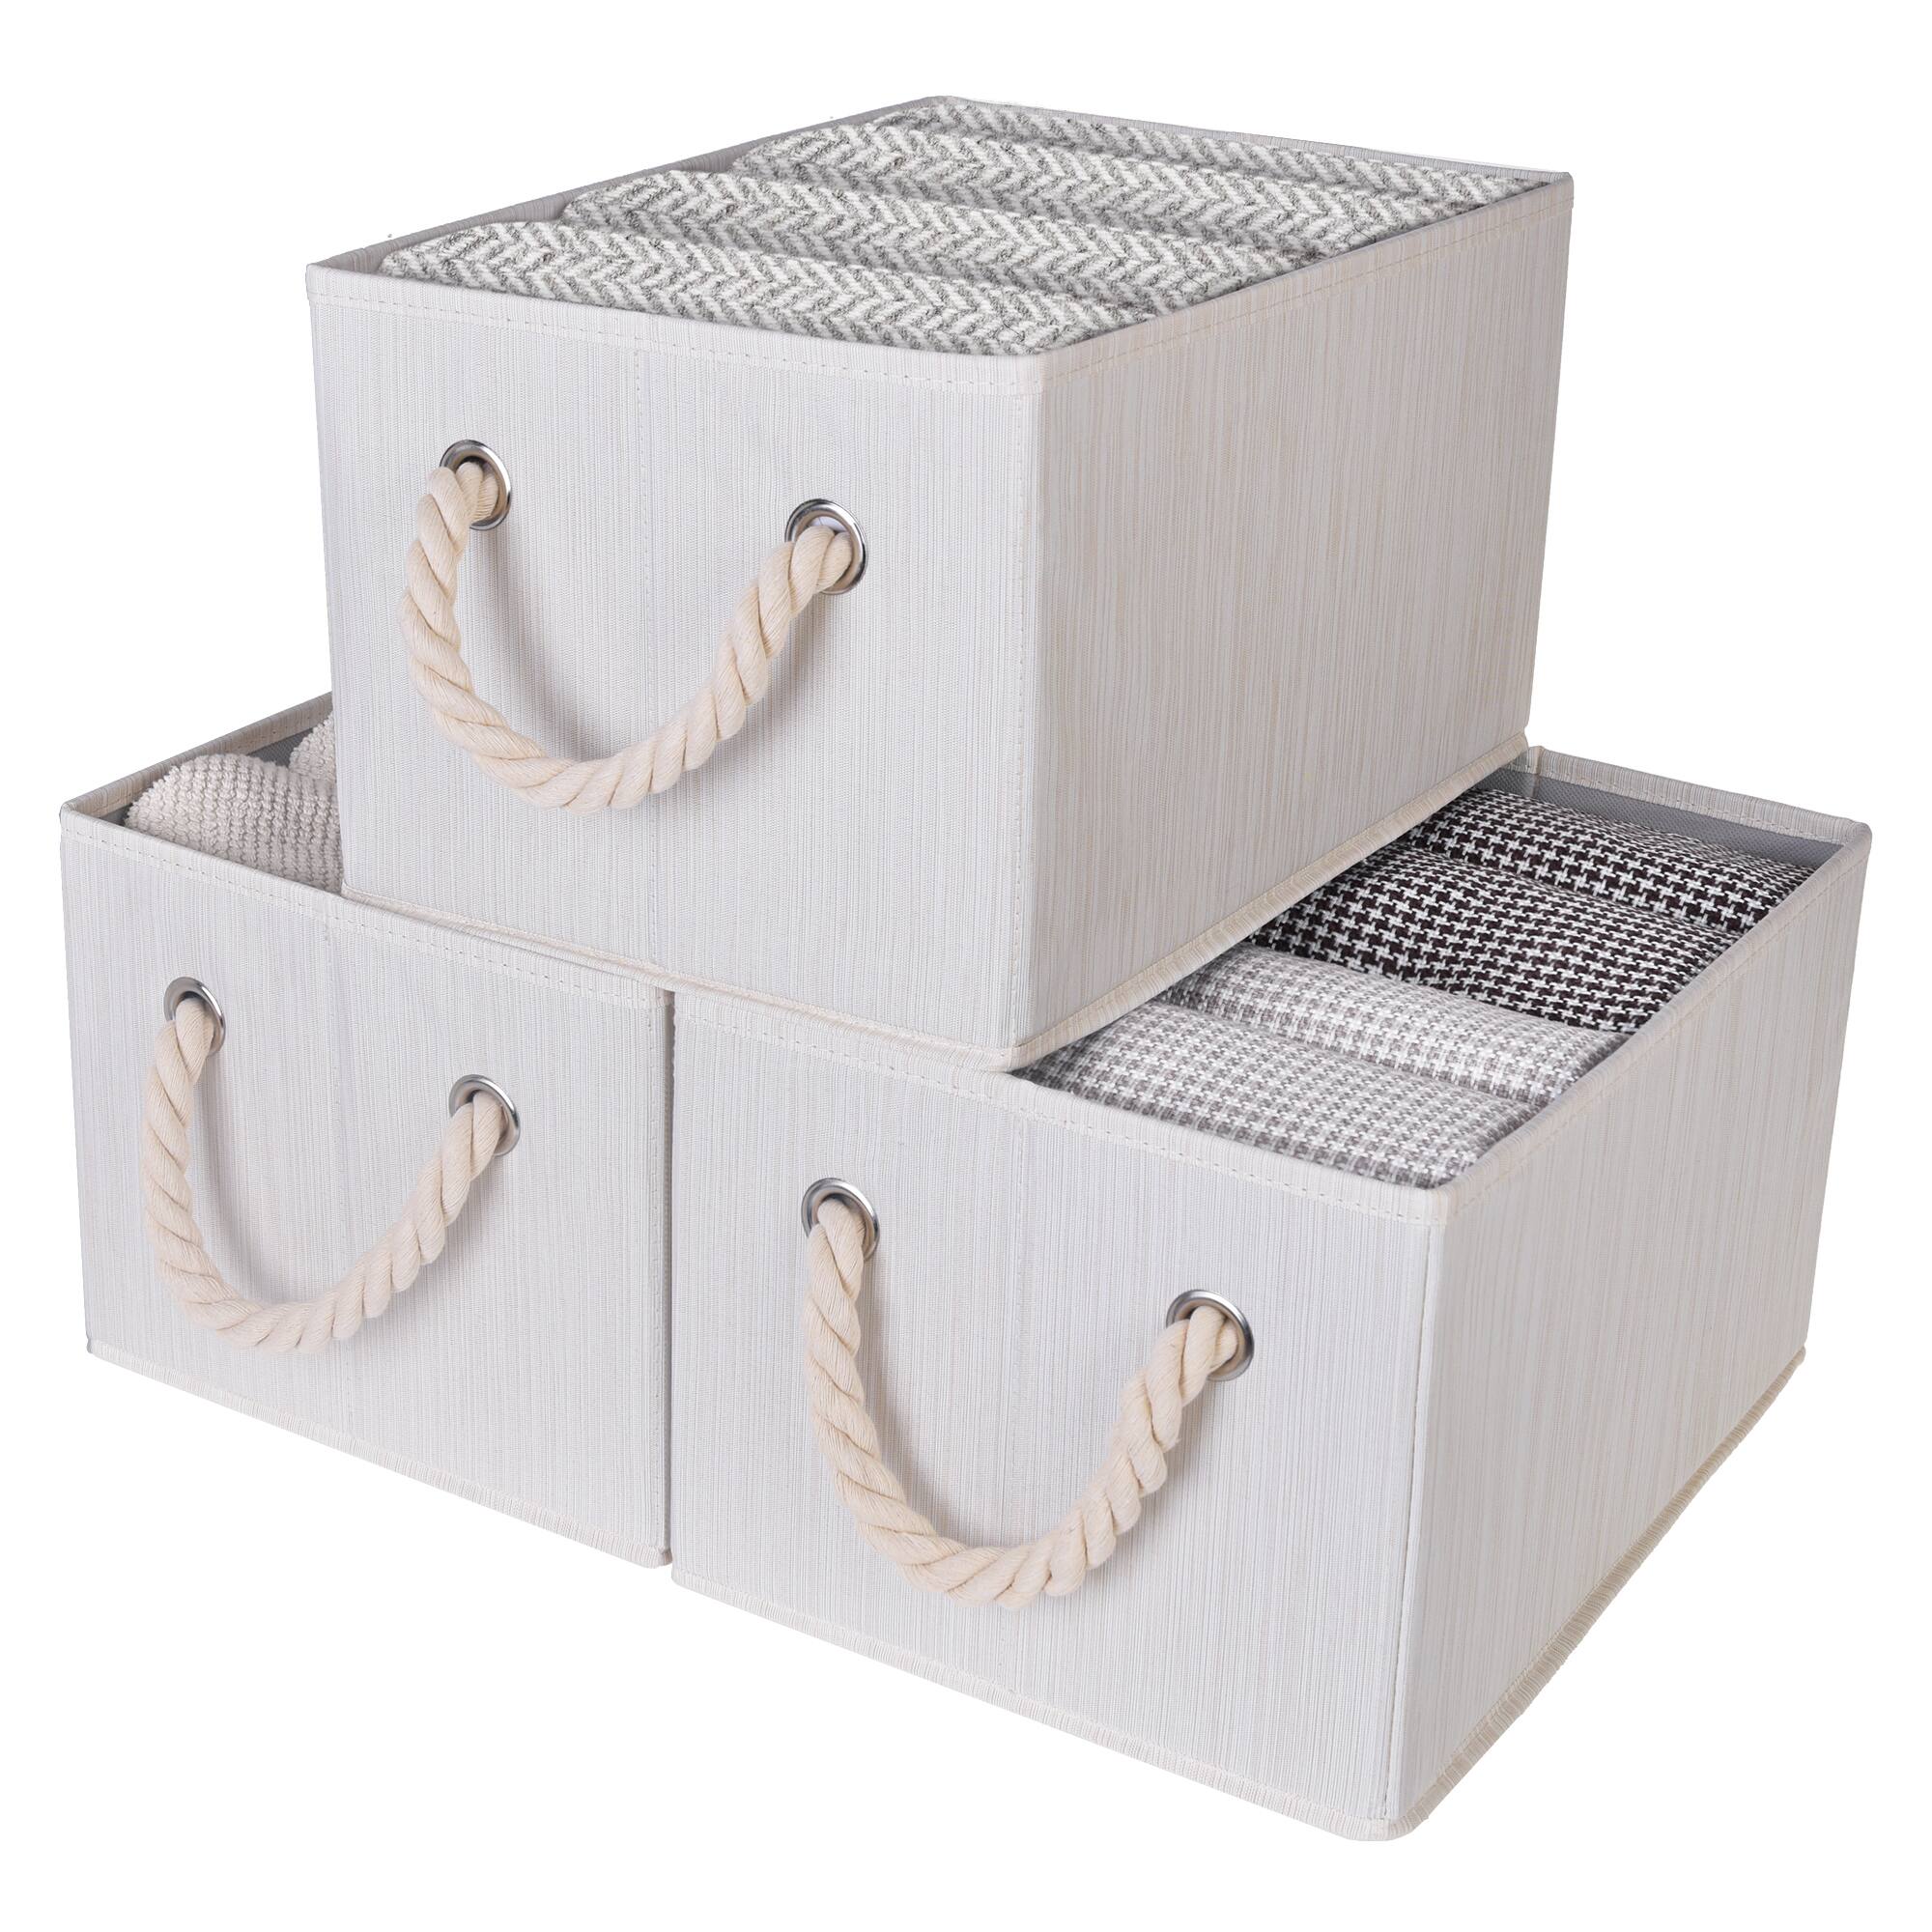 StorageWorks Storage Boxes, Mixing of Beige, White & Ivory, Large, 3-Pack - $13.99 + FS w/ Prime or Orders $25+